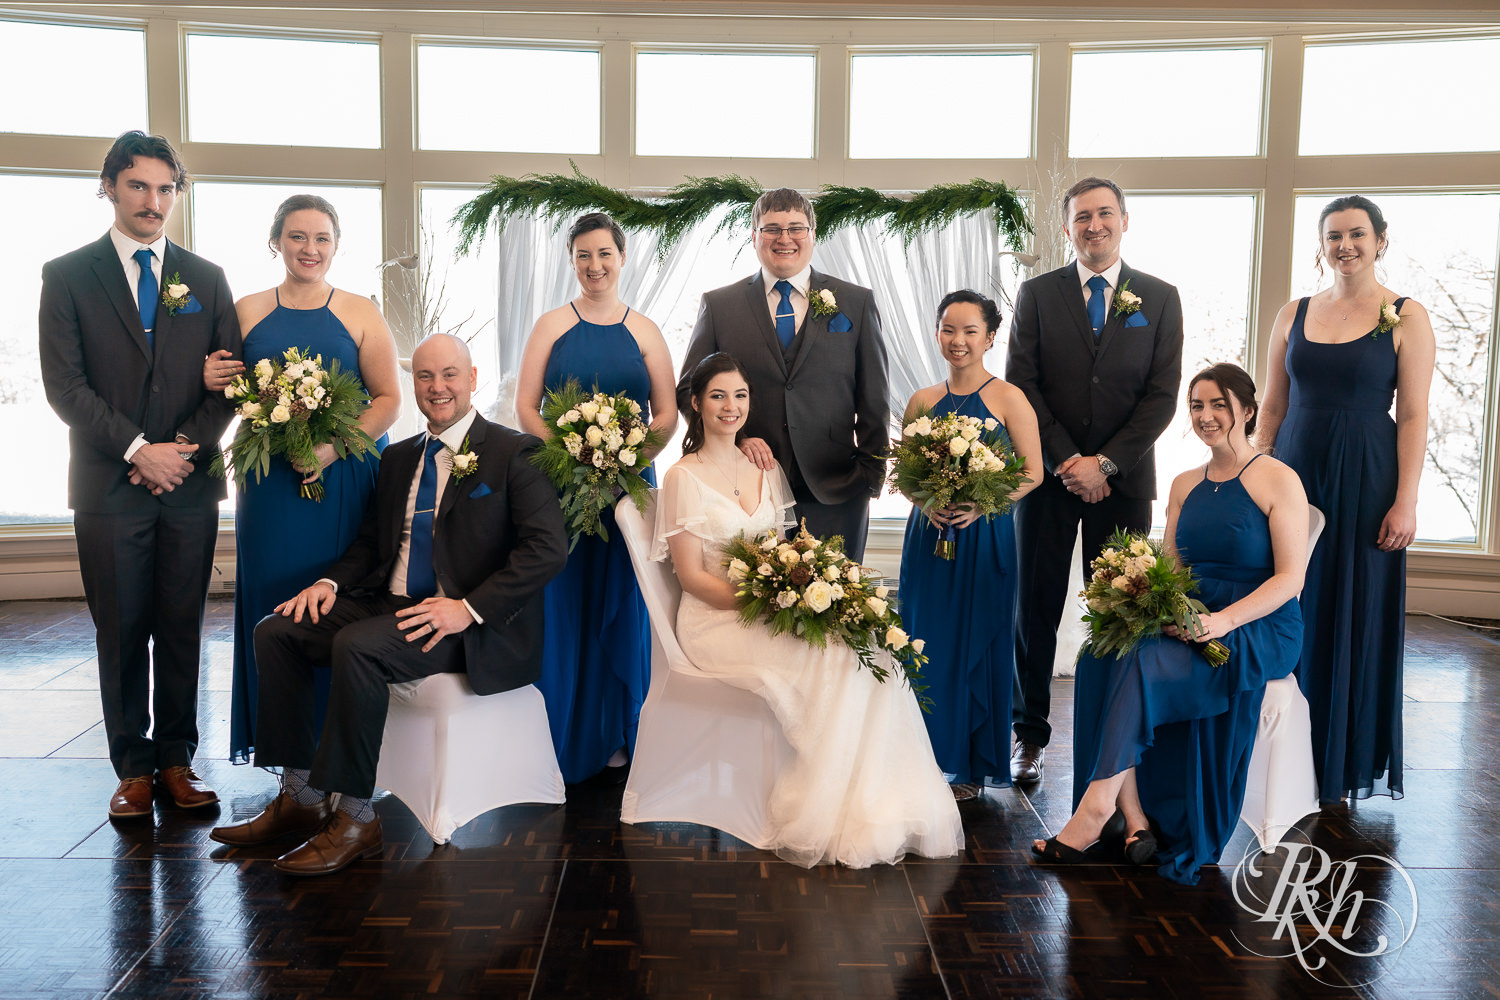 Wedding party in blue dresses and grey suits at Minneapolis Golf Club in Saint Louis Park, Minnesota.